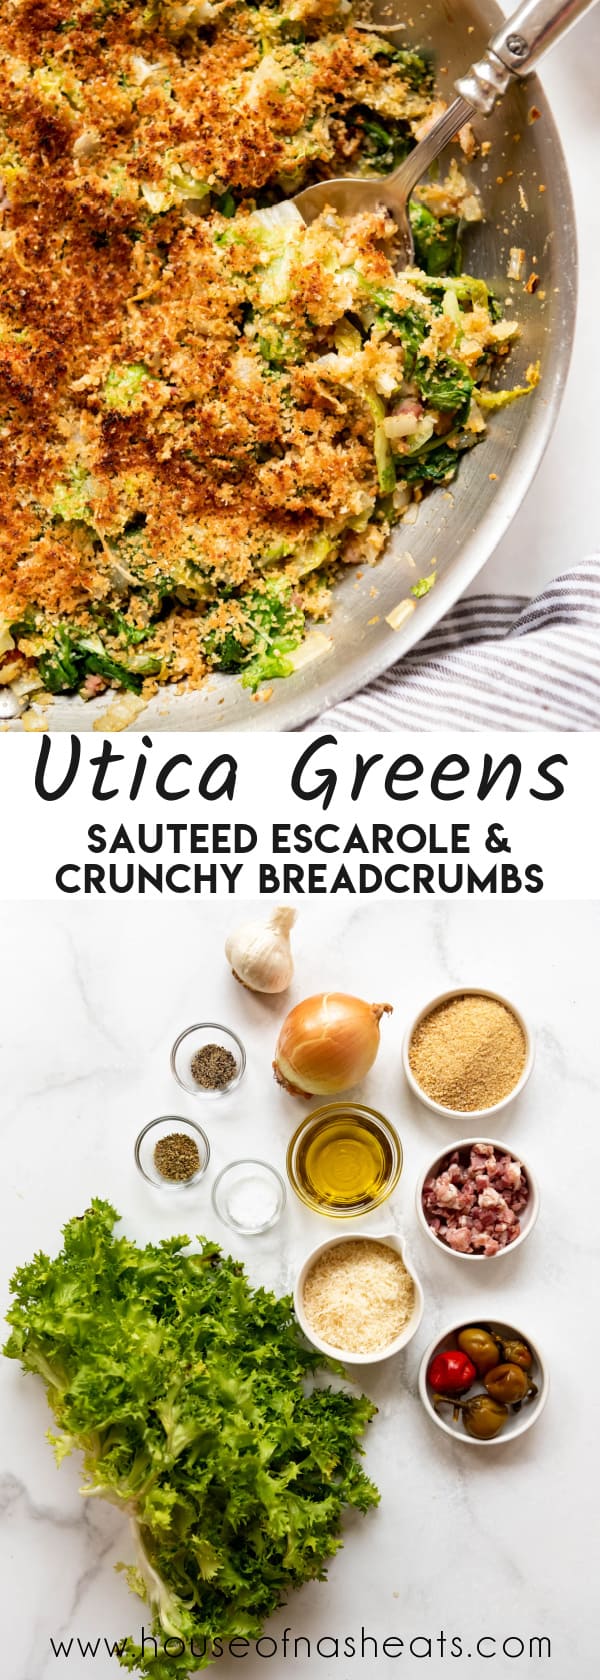 A collage of images of Utica greens with text overlay.